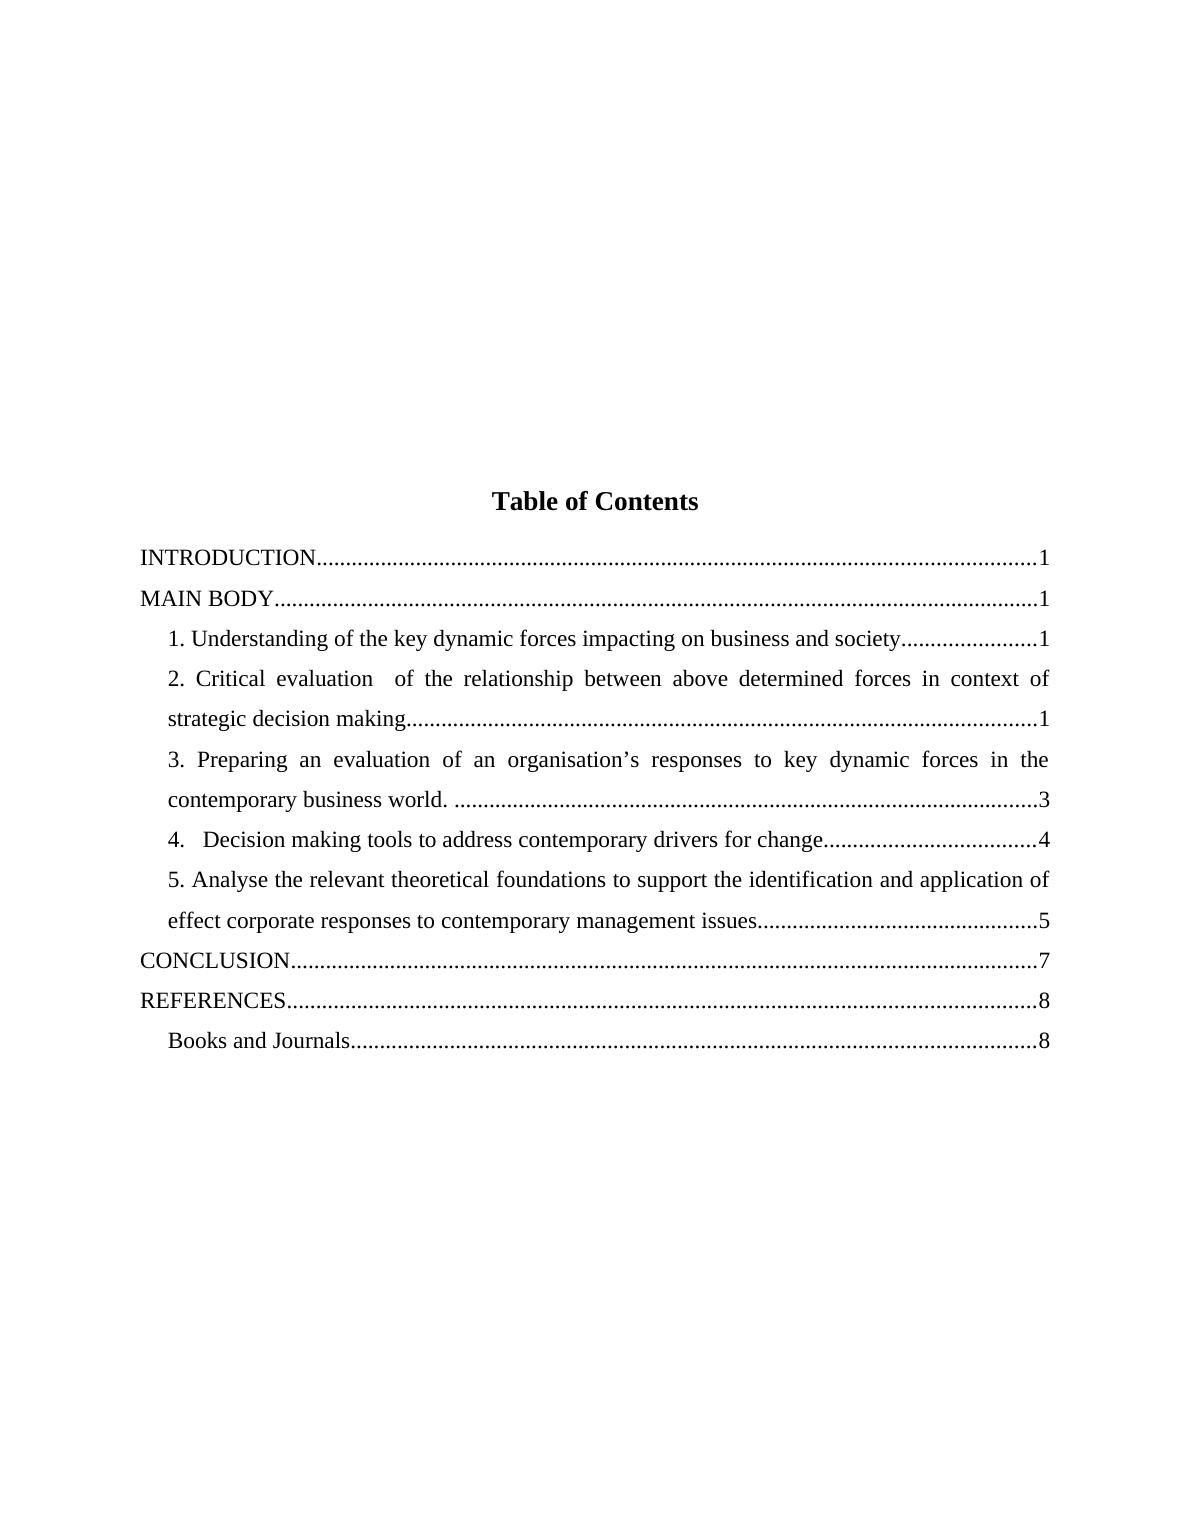 Contemporary Management Issues Assignment - ZARA_2